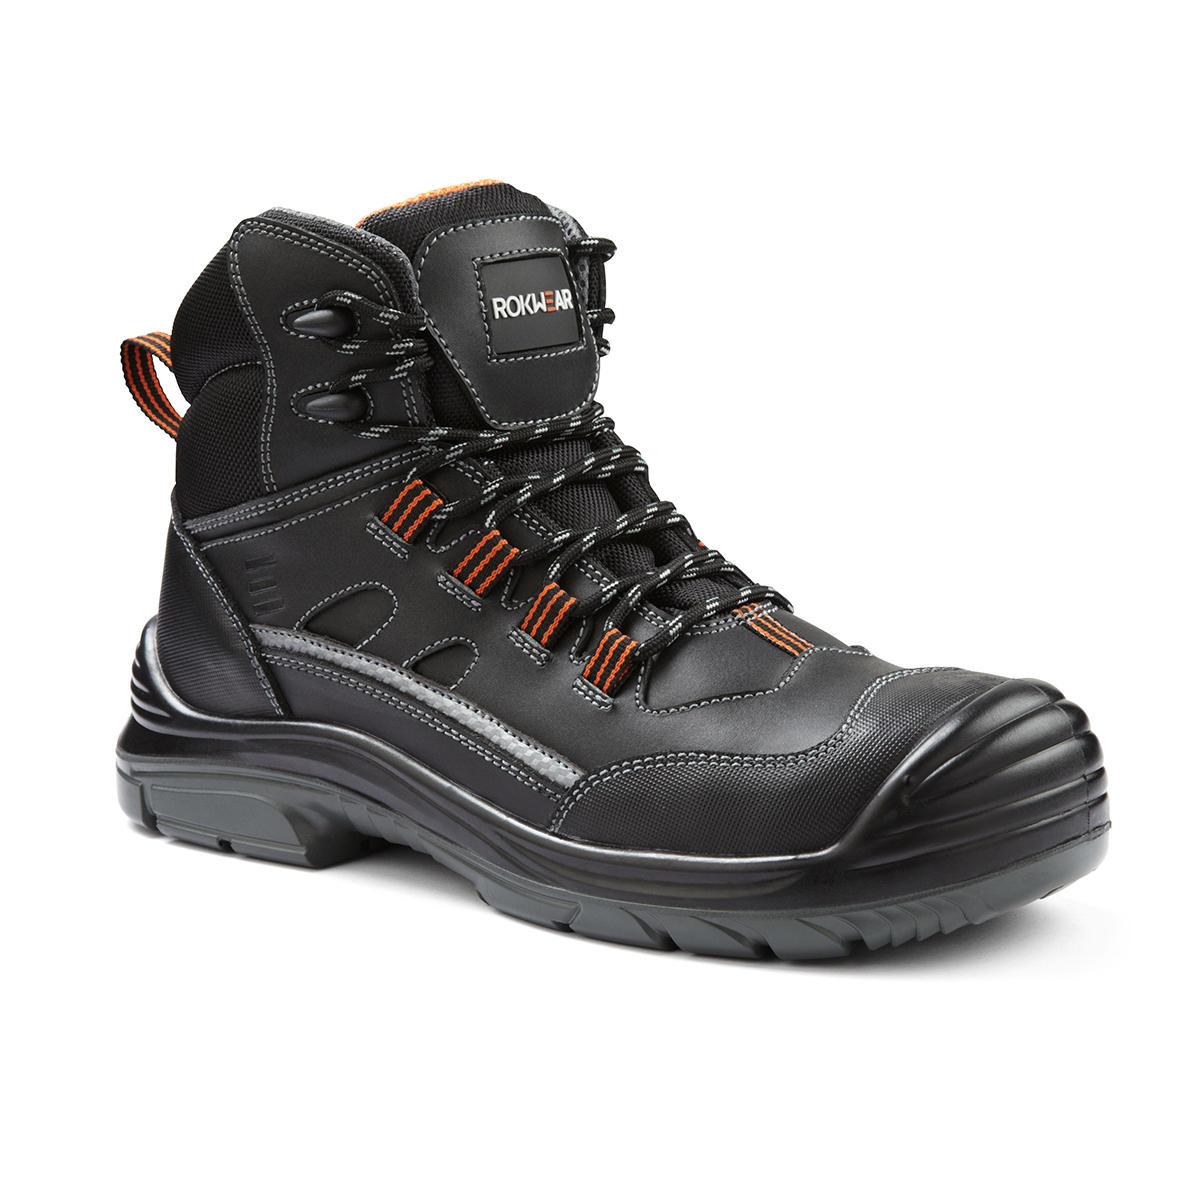 rokwear safety boots